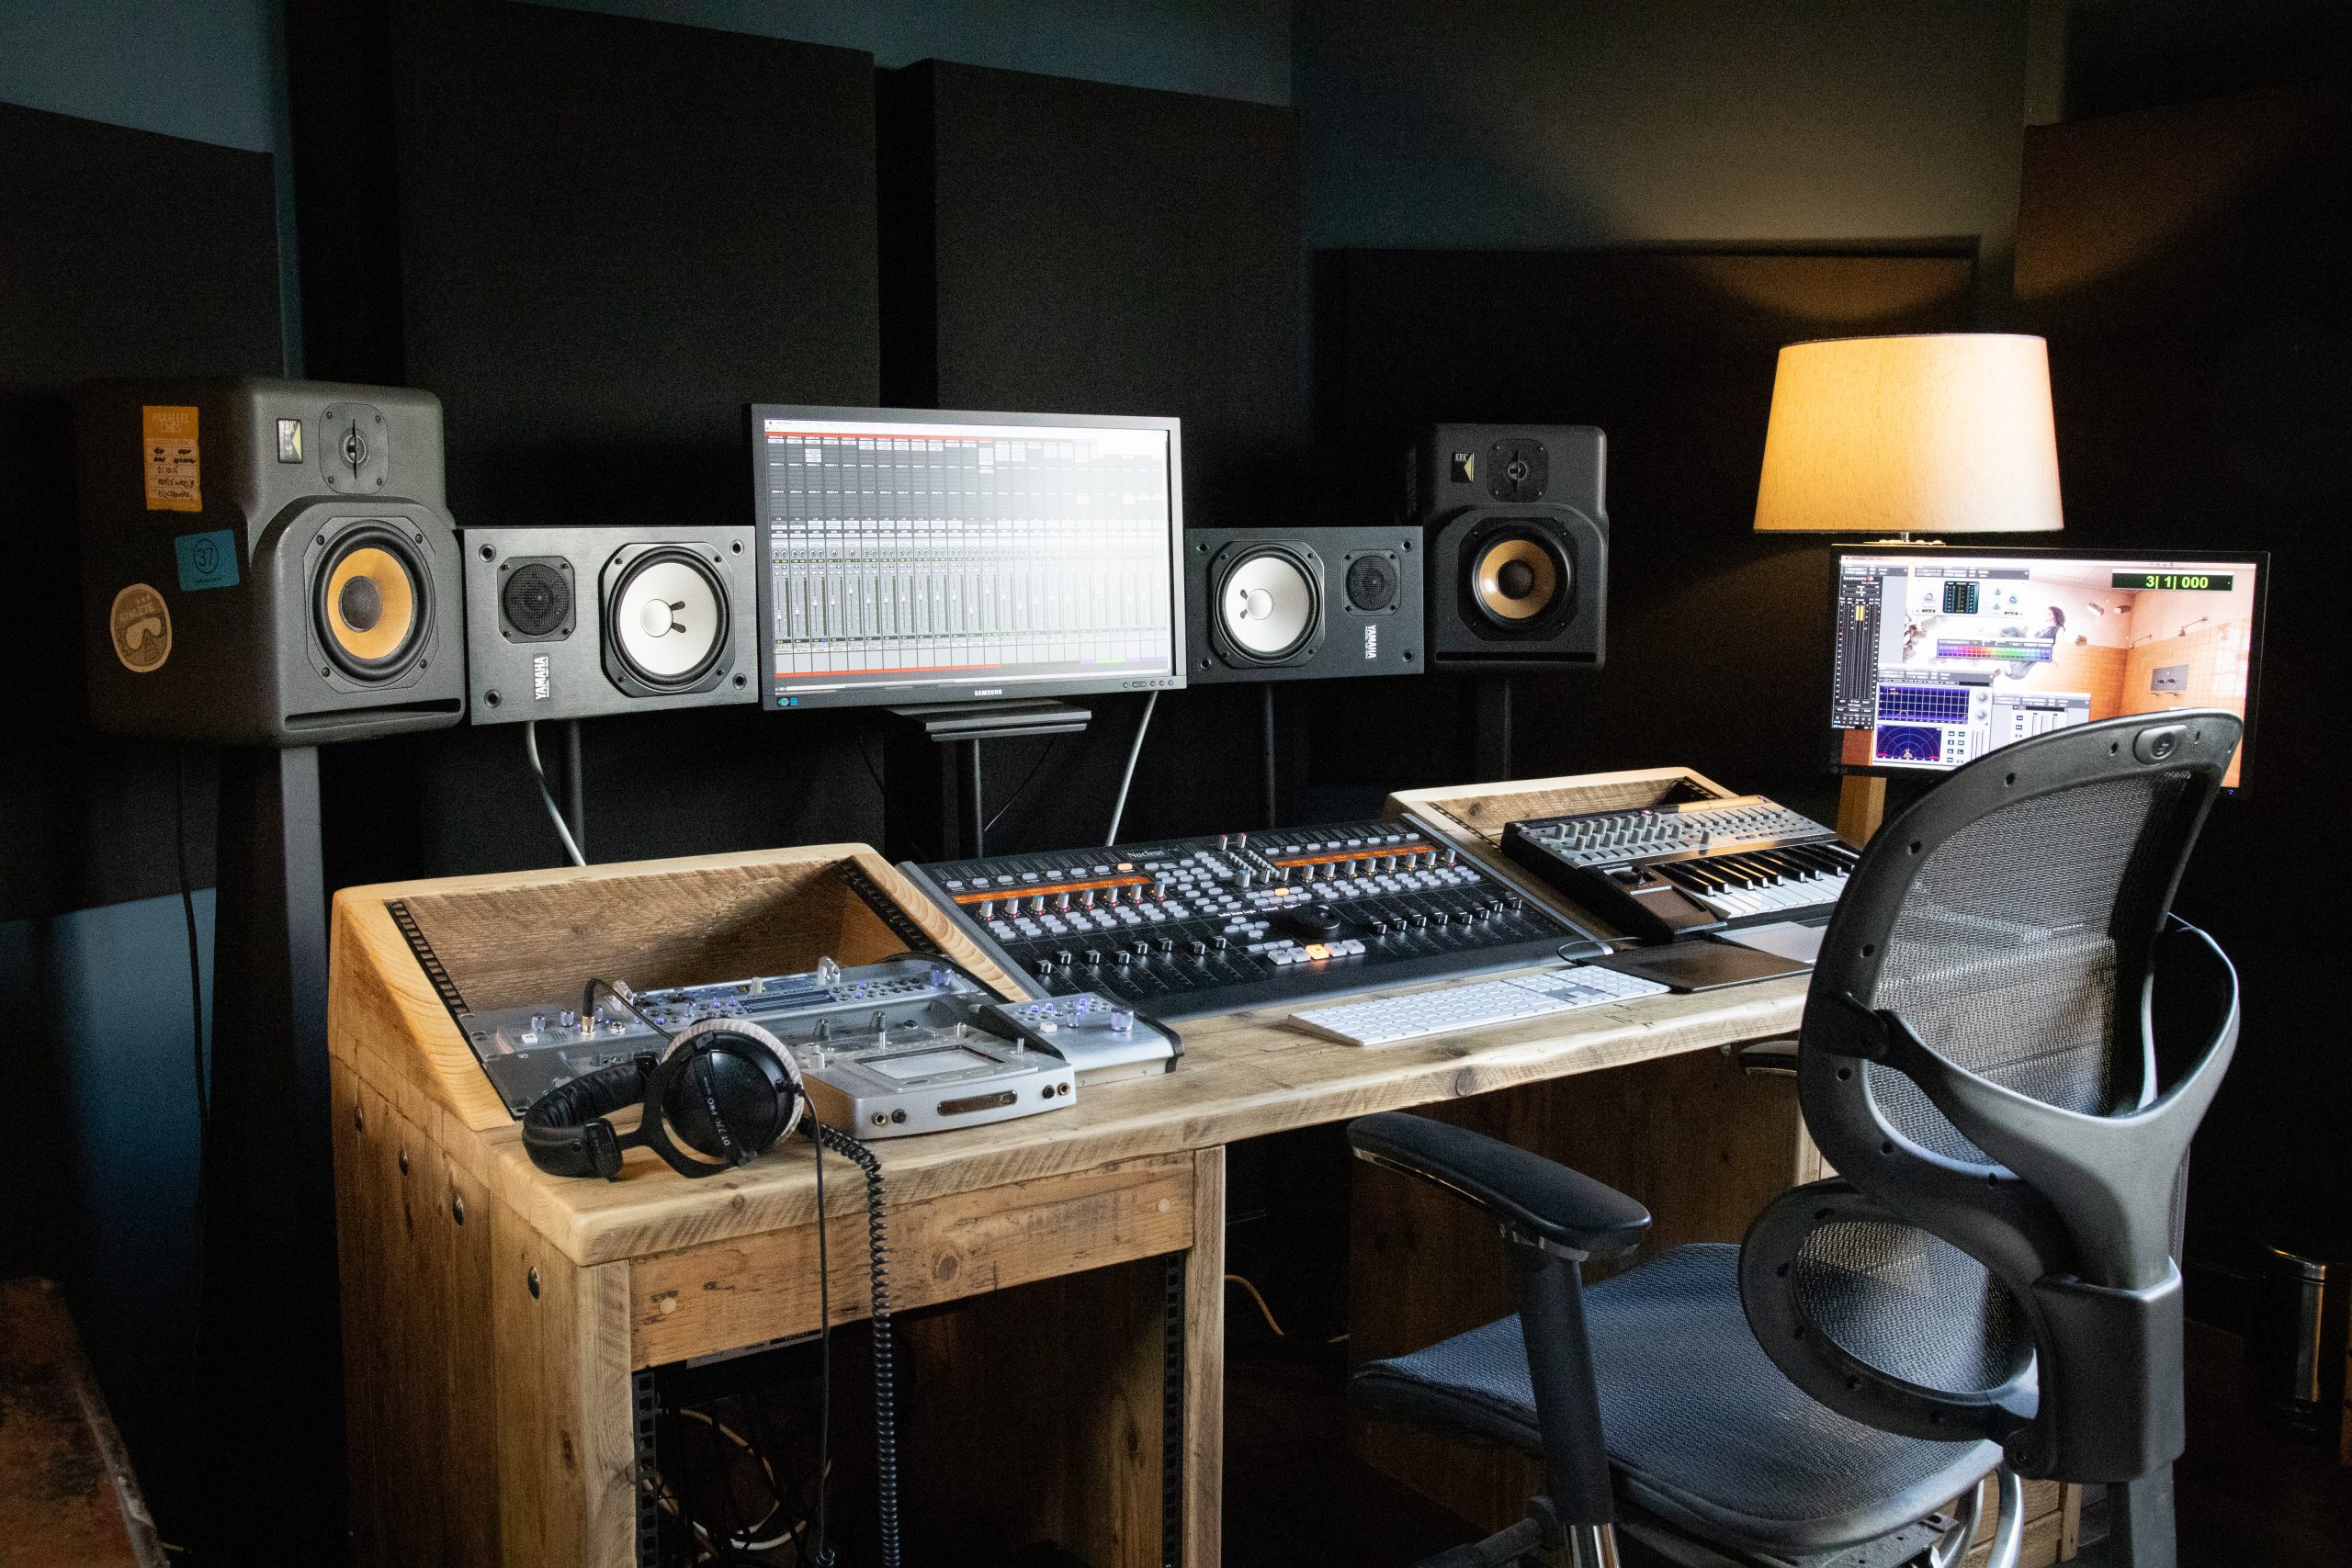 Interior view of a Vivid Green home music studio's desk with technical equipment, an empty black office chair, speakers, and a screen mounted above the desk, accompanied by a warm light lamp on the right side.